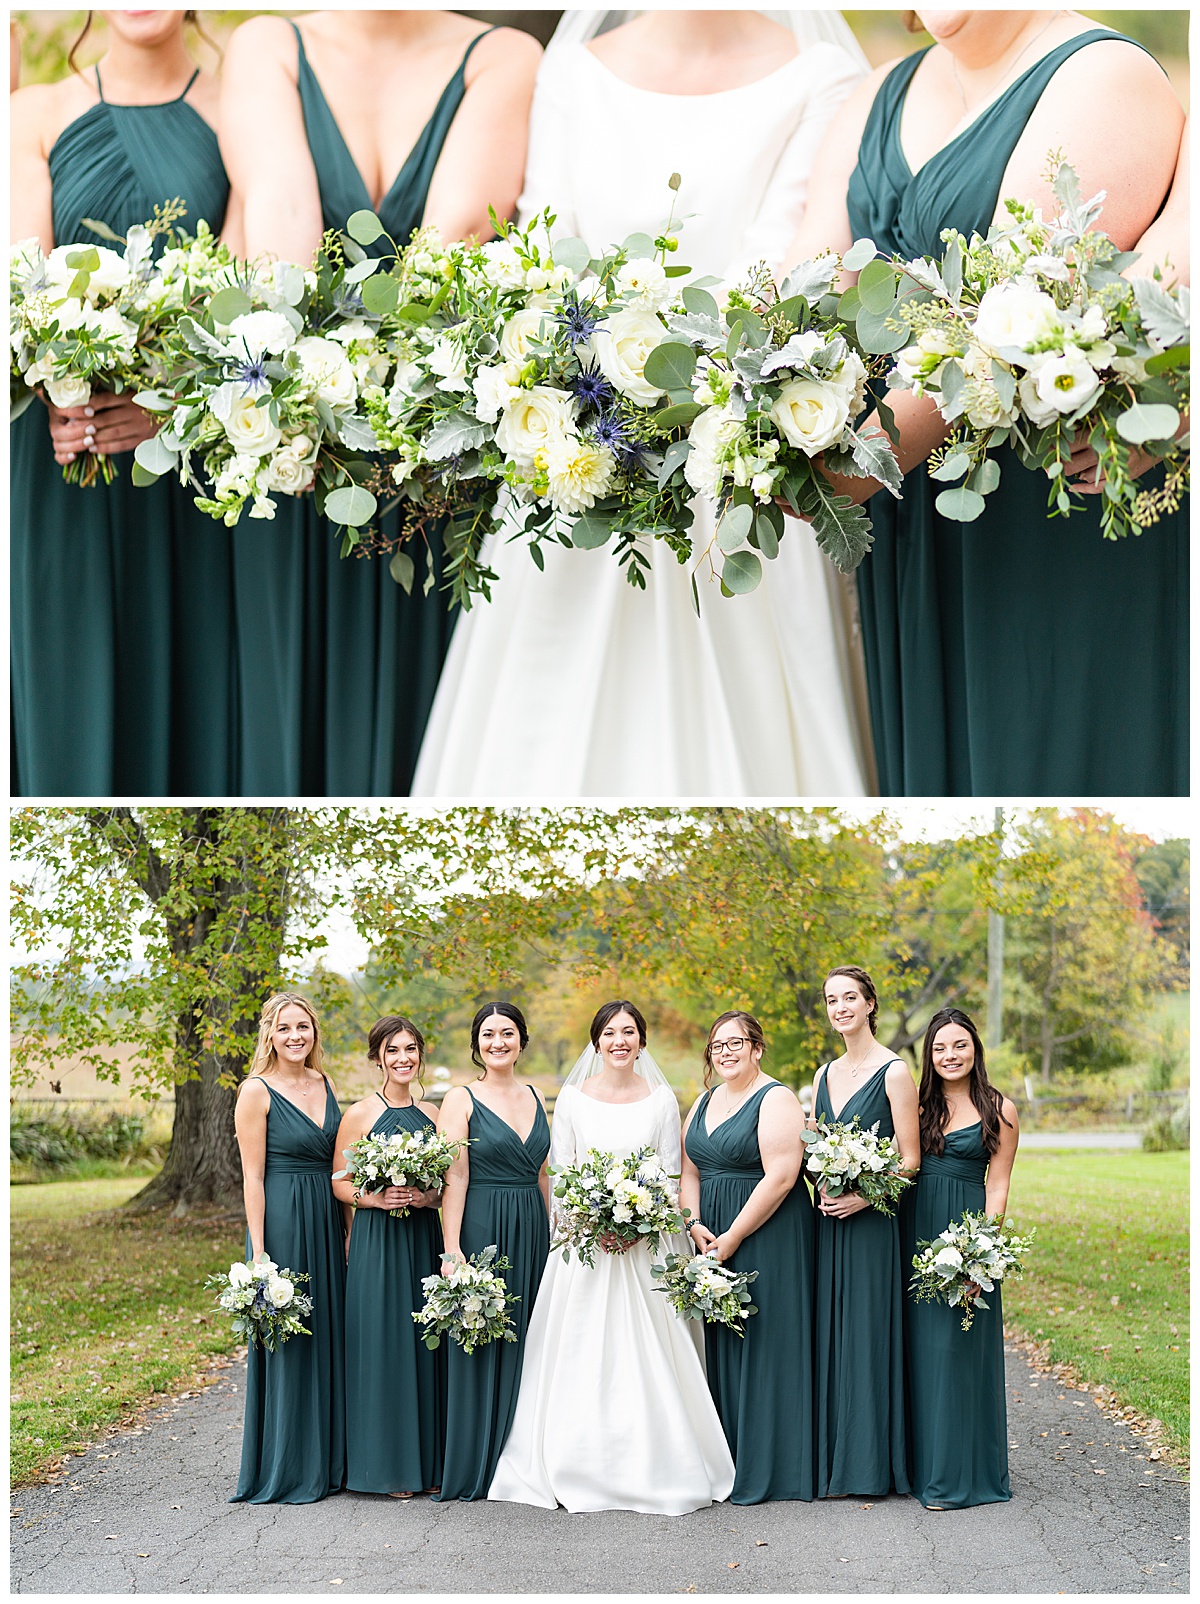 Stefanie Kamerman Photography - A Hunter Green and White Themed Wedding - Manor at Airmont - Round Hill, Virginia_0033.jpg